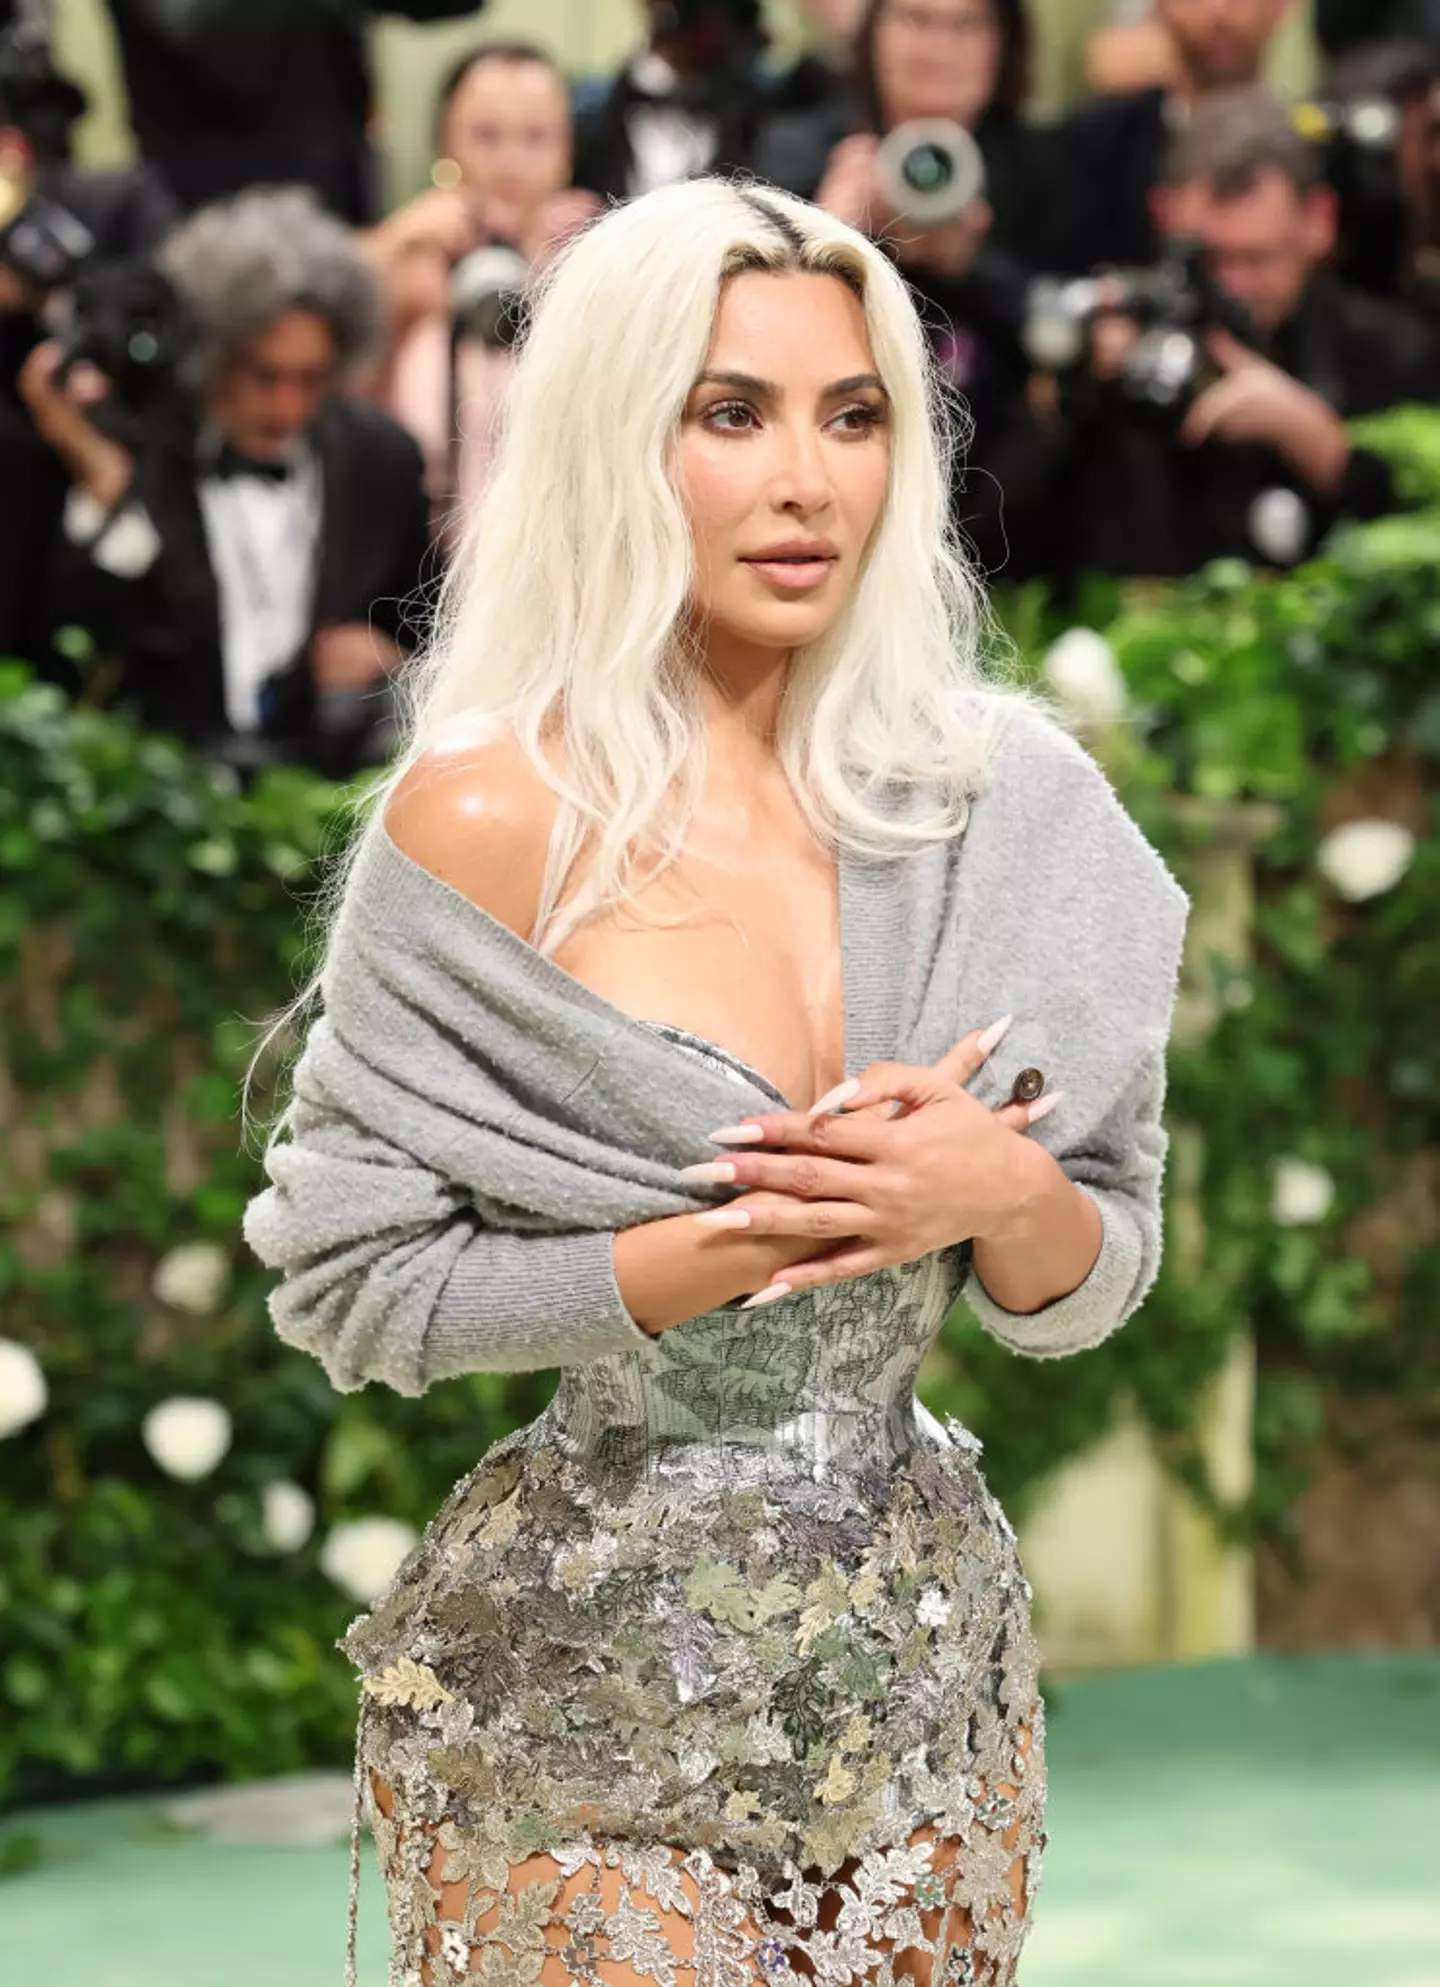 Kim Kardashian walked the red carpet wearing a corseted dress. (Aliah Anderson / Staff / Getty Images)